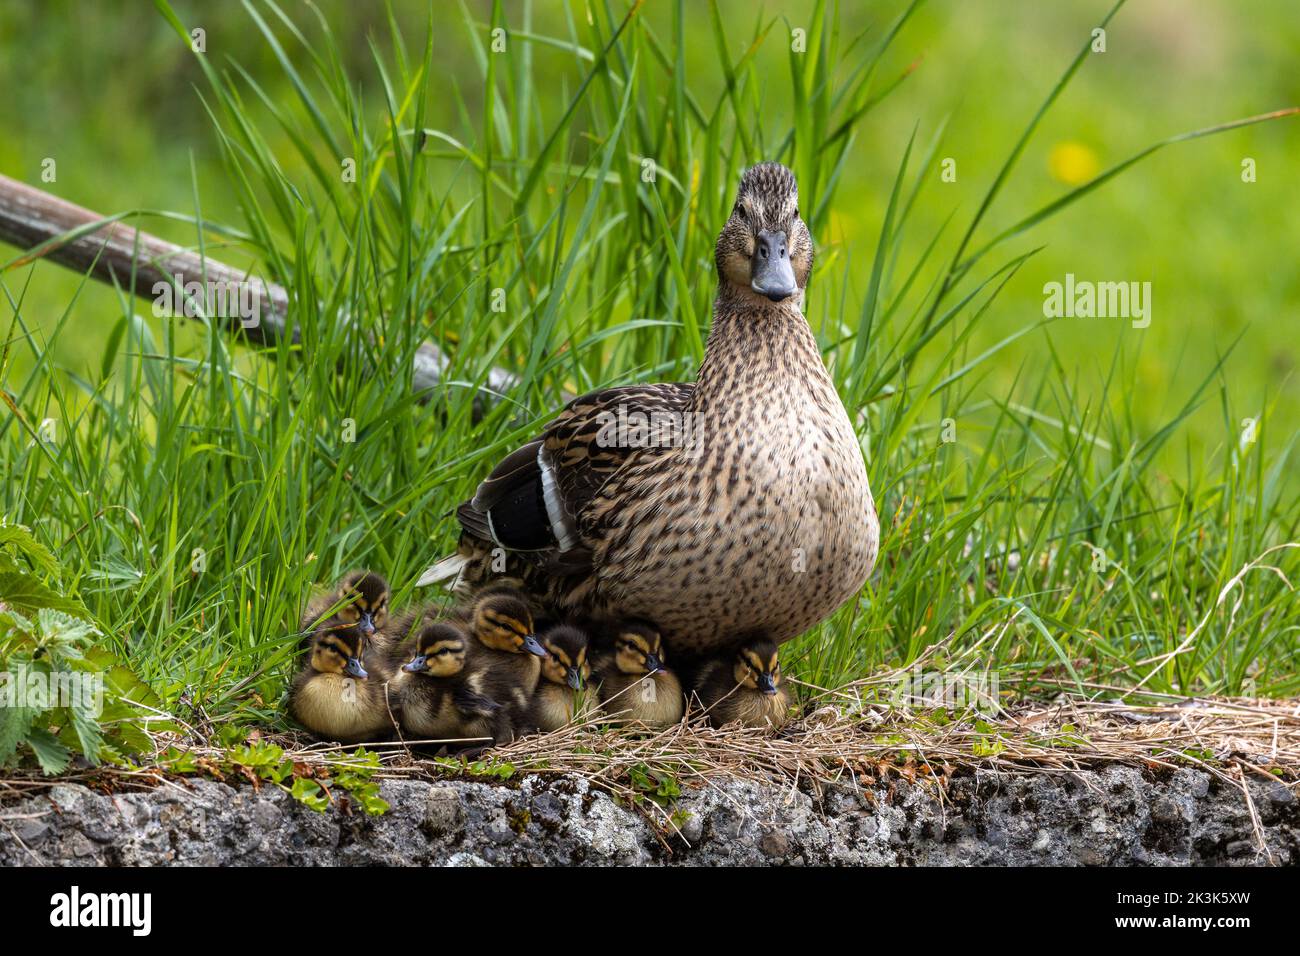 Wild duck or mallard, Anas platyrhynchos family with young goslings at a lake in Munich, Germany.The mallard is a dabbling duck. Stock Photo